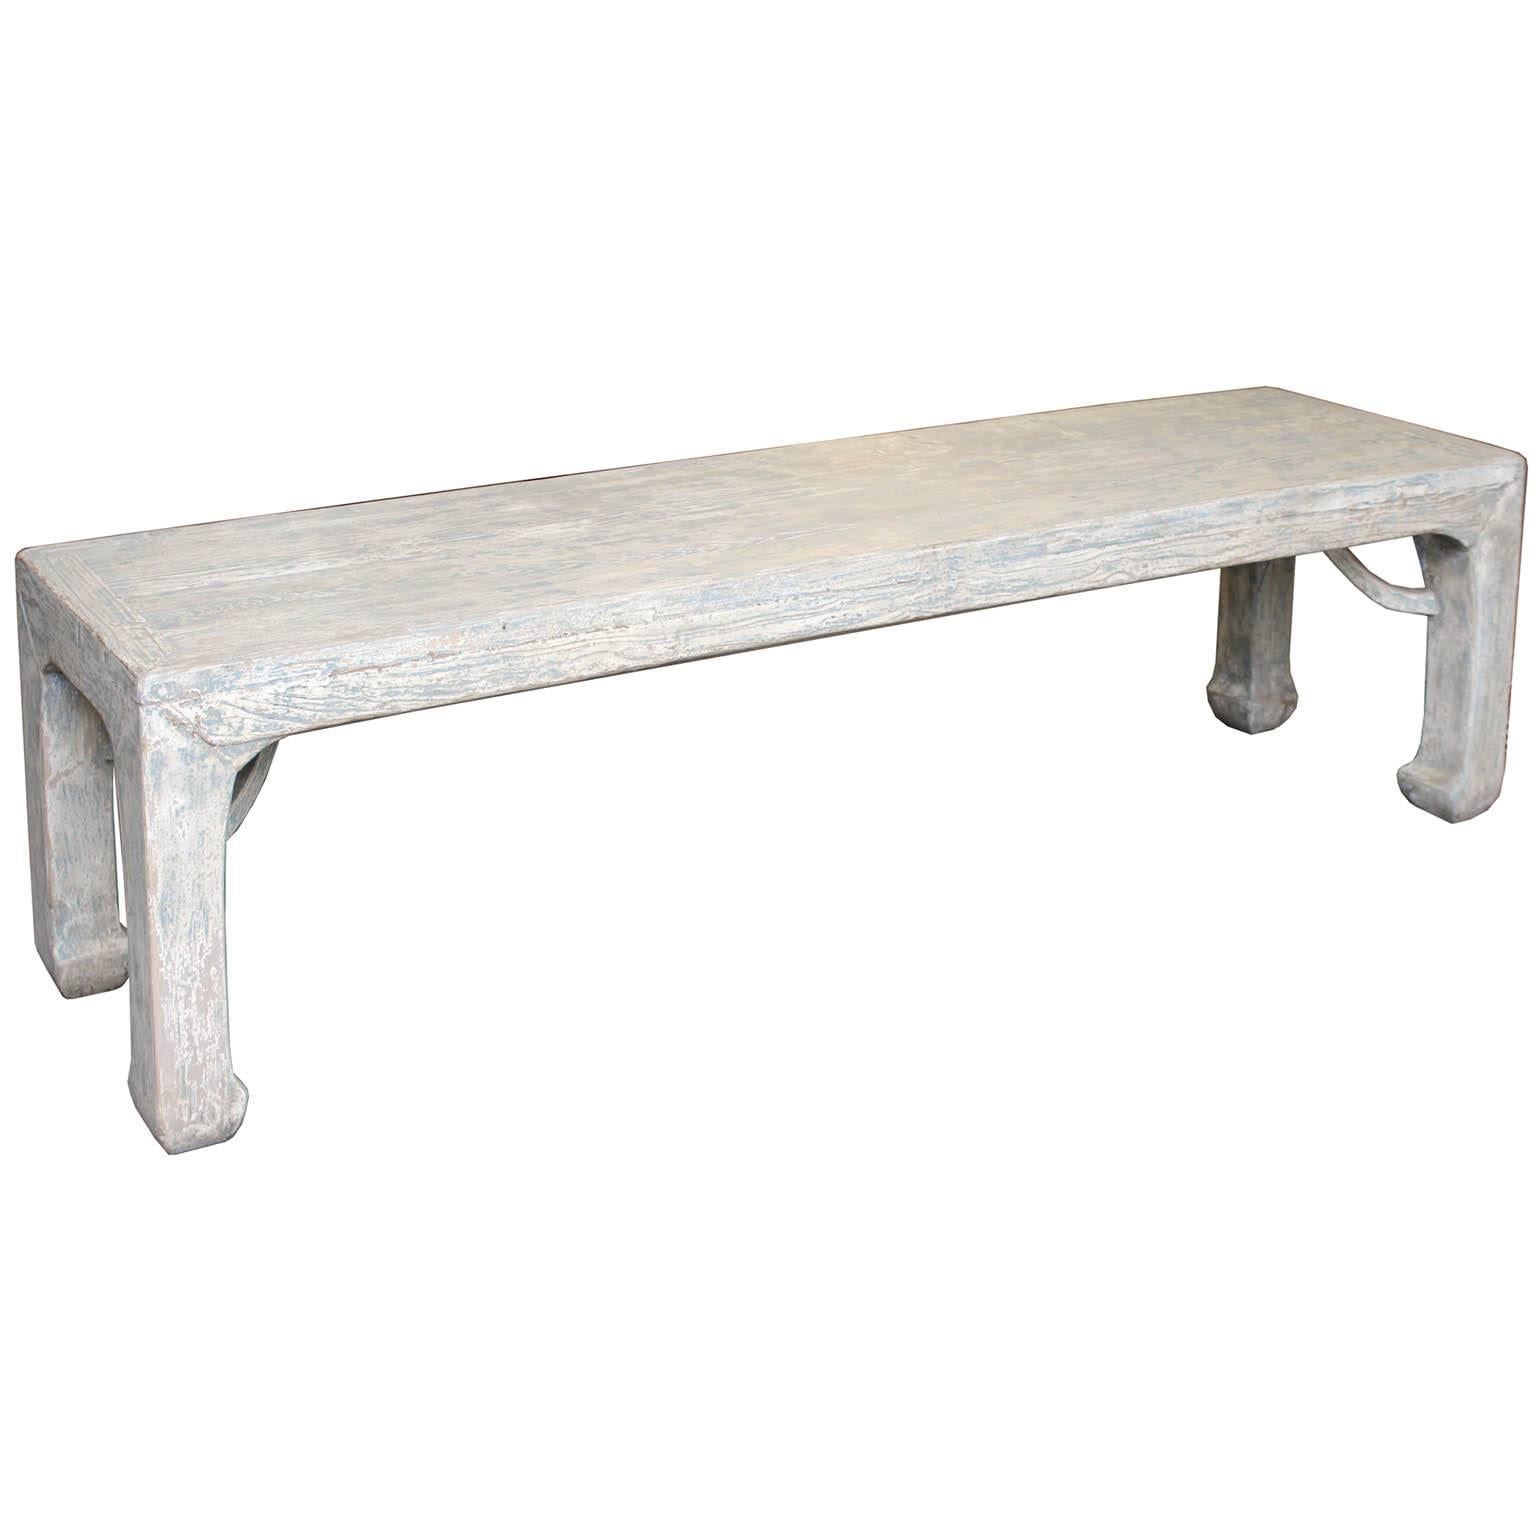 Long bench with unique matte cream and blue finish and wonderful elmwood grain. Curved arm braces below the top surface and horse hoof feet. Made from an old recycled door. Perfect at the end of the bed or use as extra seating in a contemporary